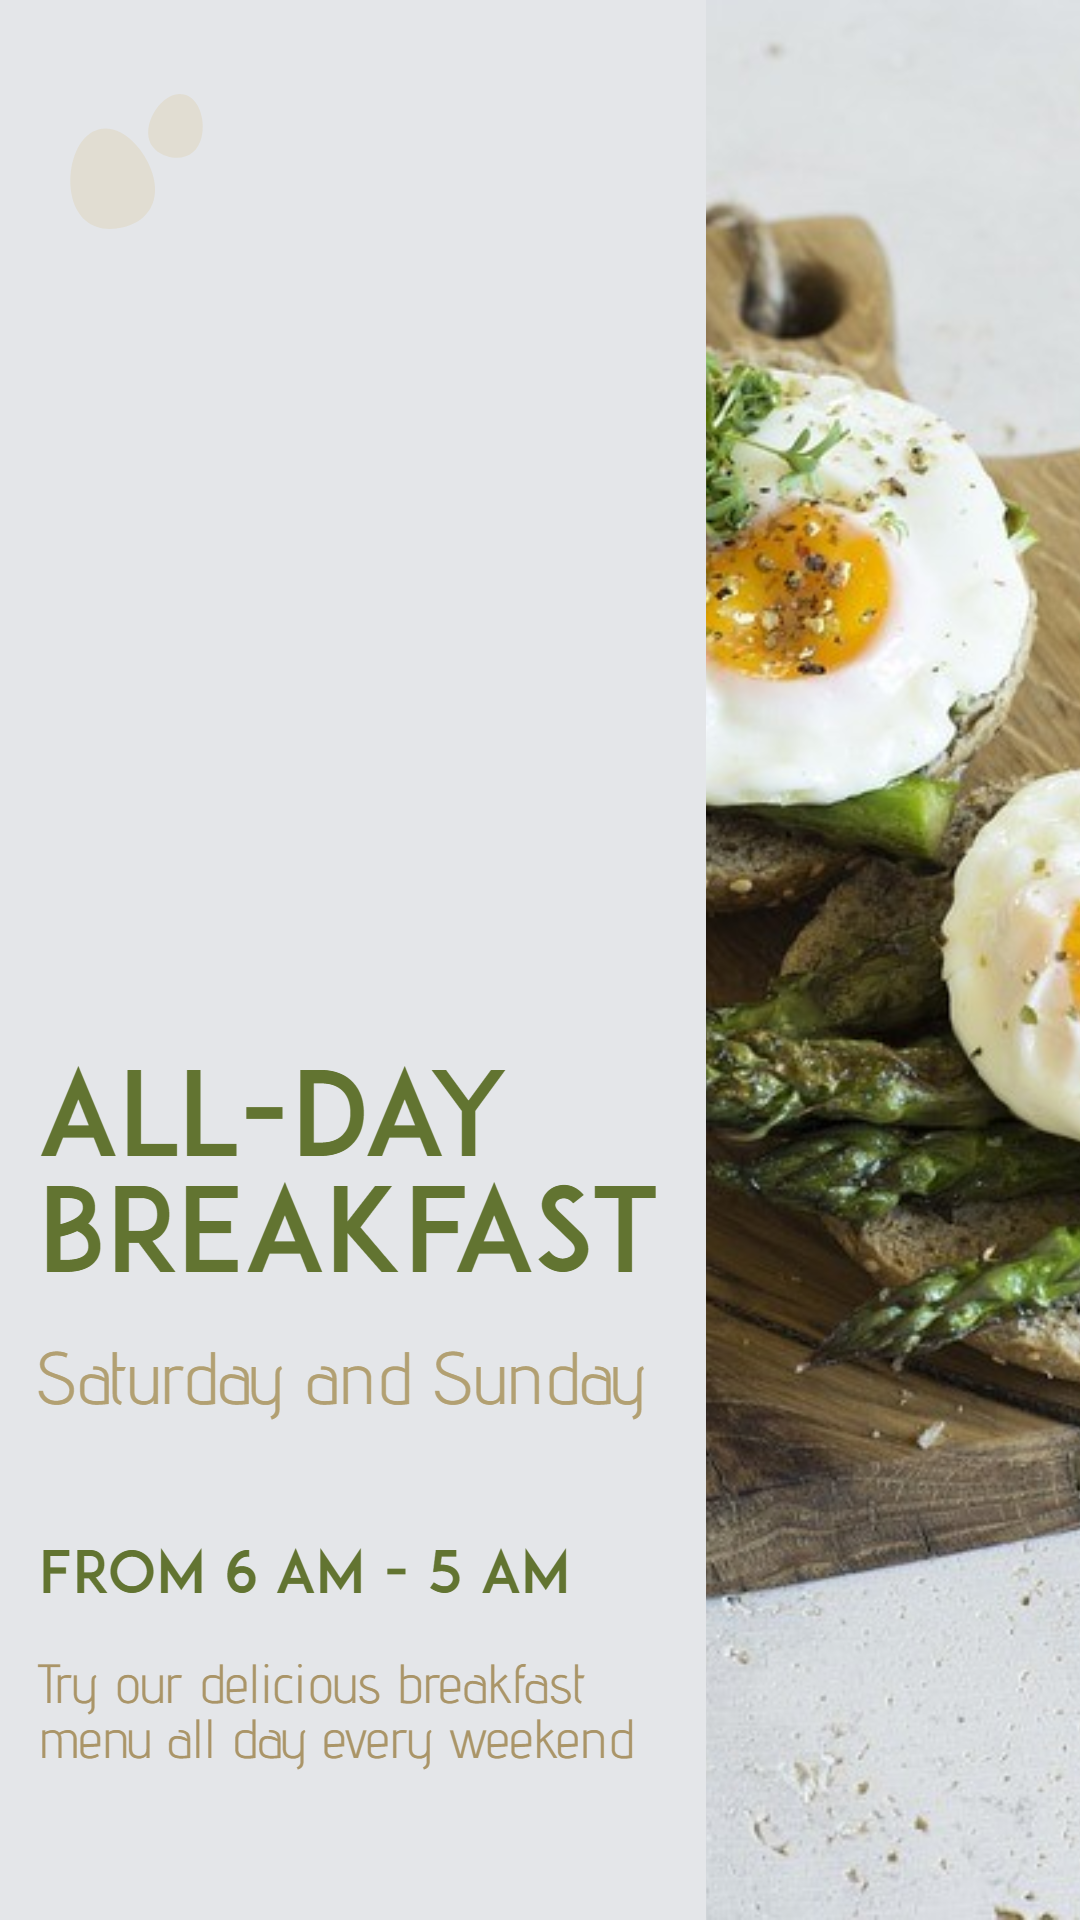 All day breakfast #business Animation  Template 